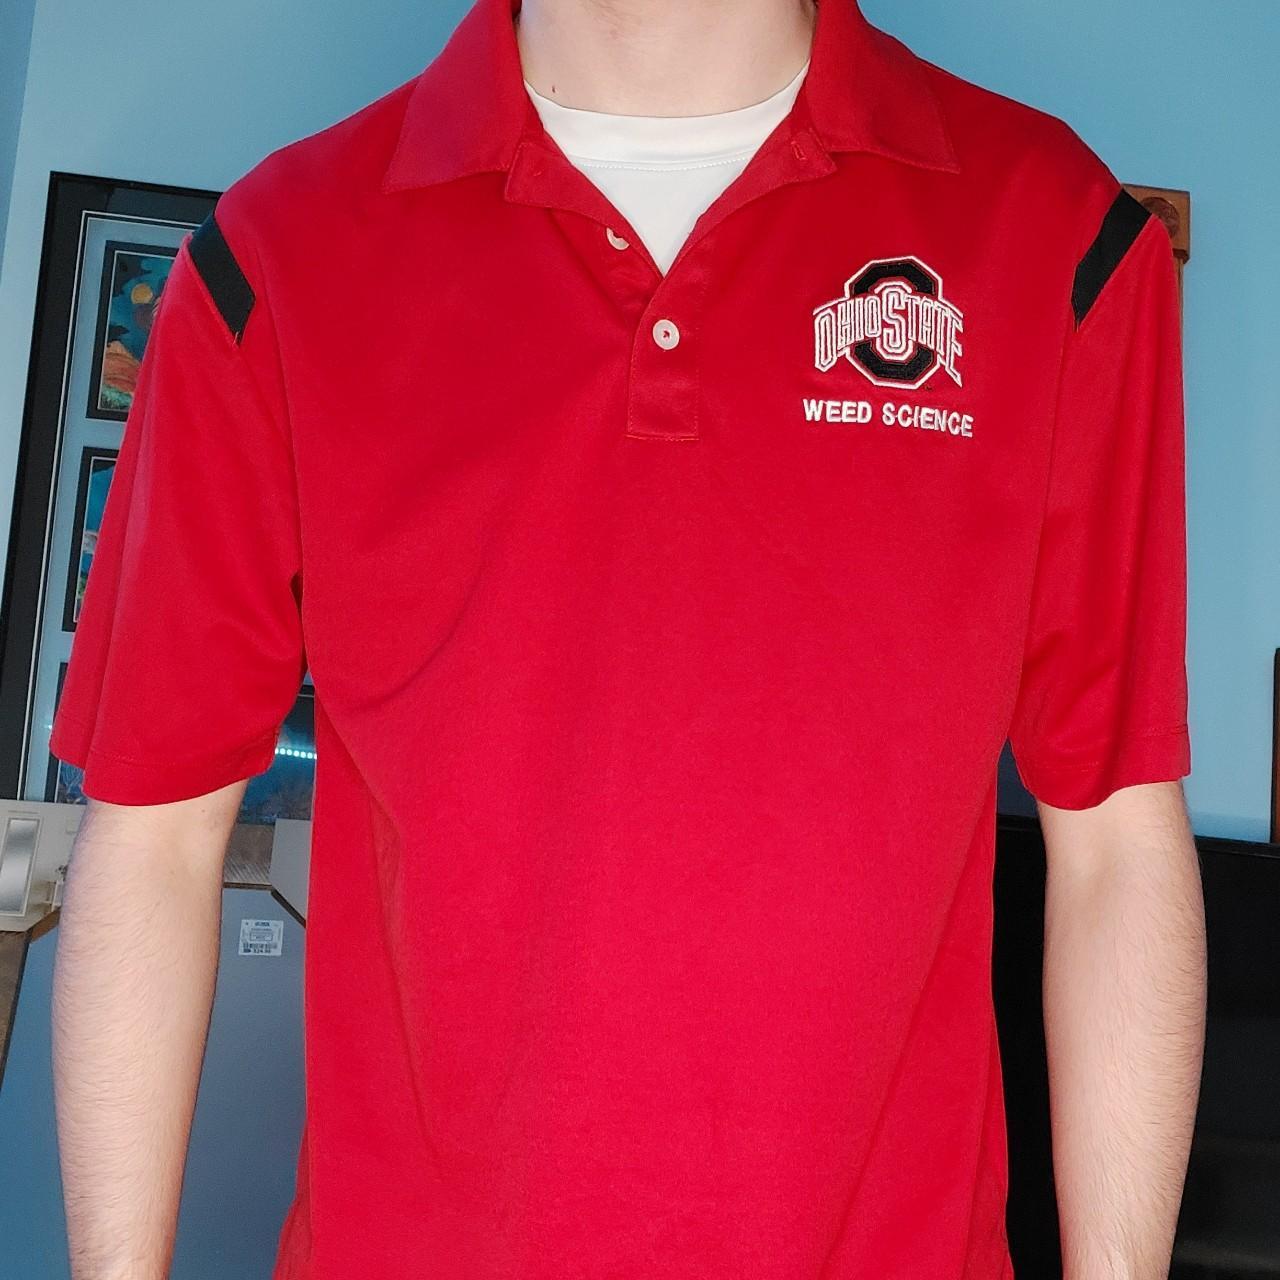 Nike Men's Black and Red Polo-shirts (2)